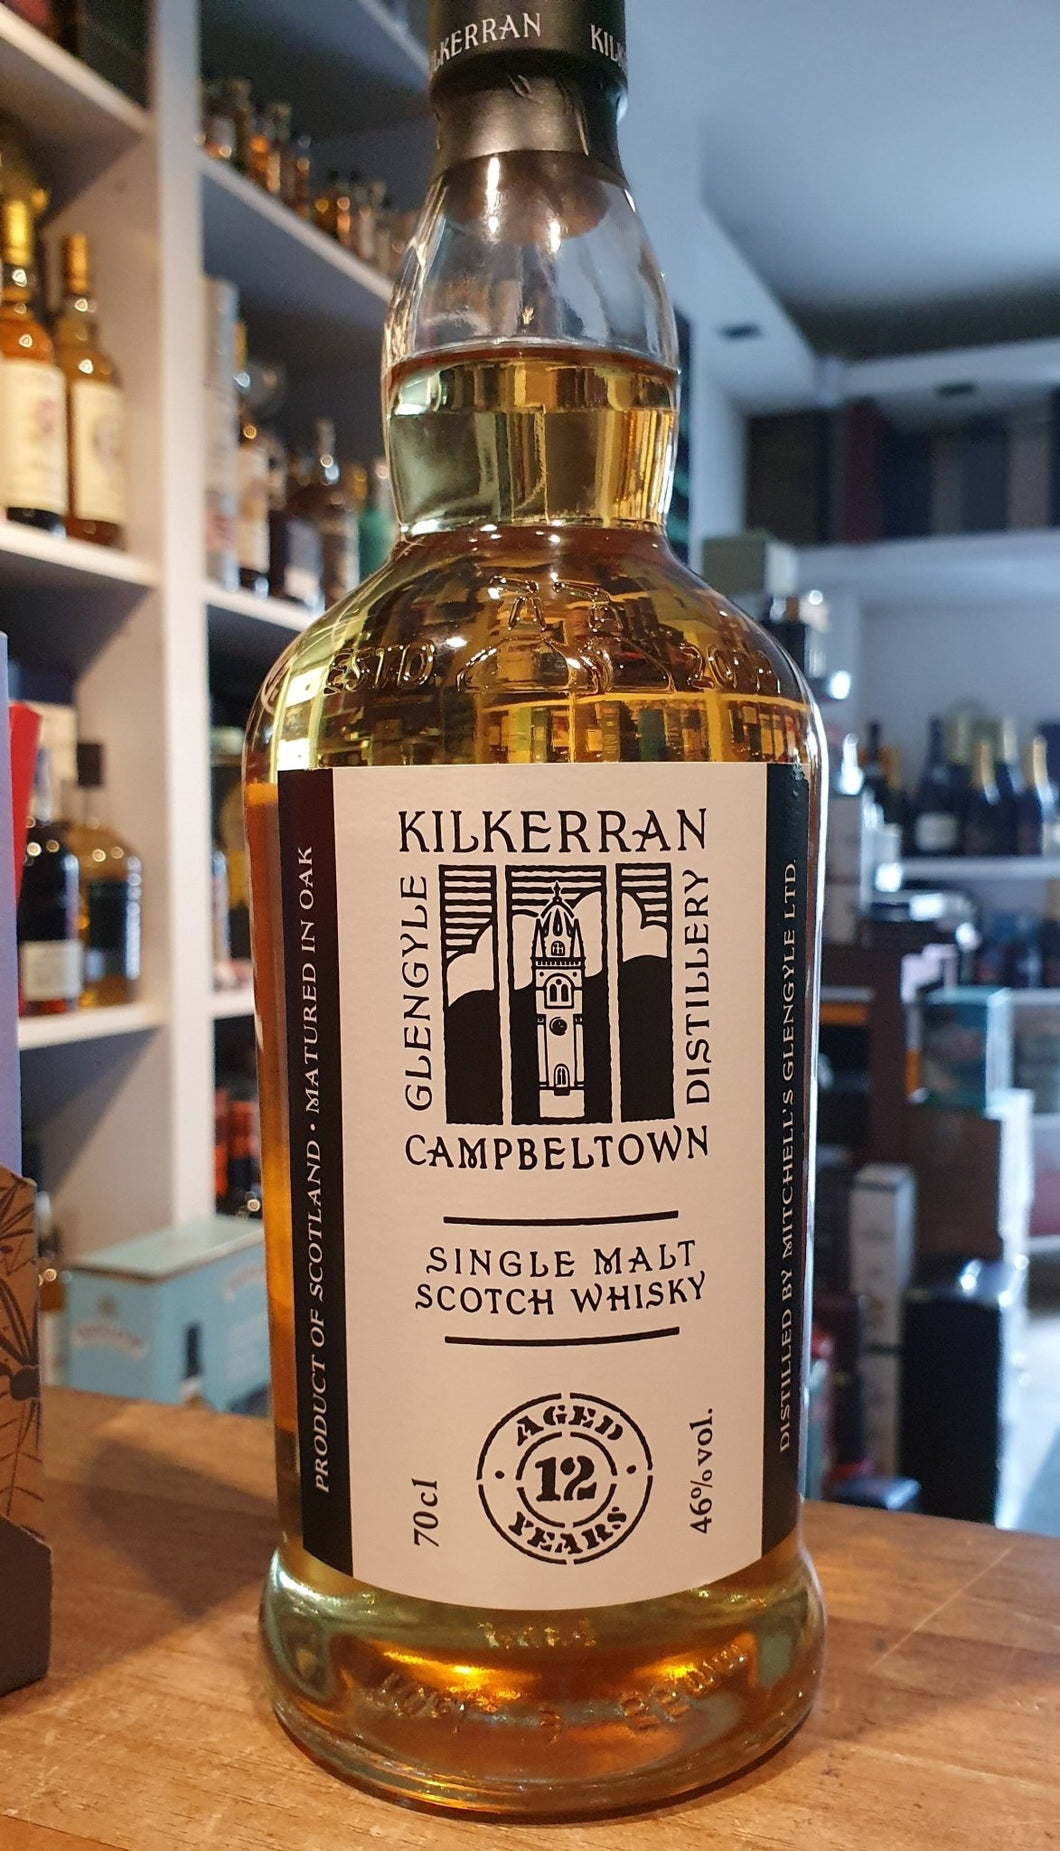 Kilkerran 12y 2022 0,7l 46%vol.  Schottland Campbeltown Mitchell’s Glengyle Distillery Cask Types: 70% Bourbon & 30% Sherry     Nose: Oak notes are dominant, followed by toasted marshmallows and dried fruit pudding, as well as cherries, marzipan and a hint of peat.  Palate: Initially fruity with citrus notes and orange peel, after this vanilla, butterscotch, honeycomb digestive biscuits tasted .  Finish: Velvet smooth lemon meringue, , oiliness saltiness  Campbeltown dram.